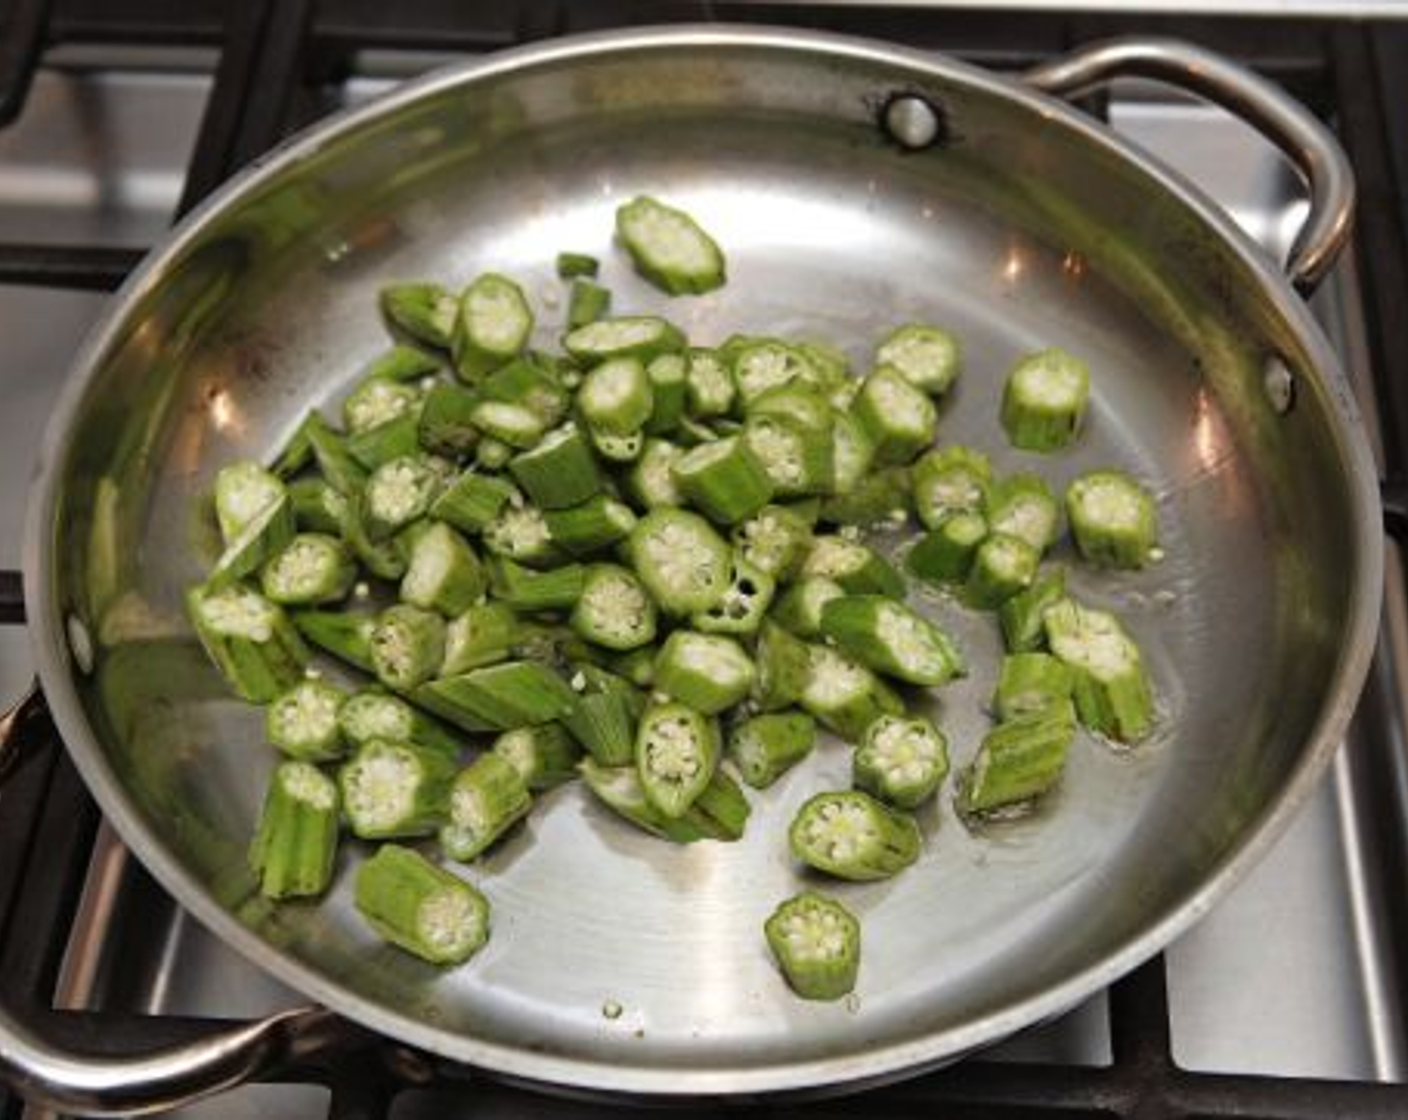 step 7 While the squash is roasting, heat a large sauté pan over medium high heat. Add 2 tablespoons Olive Oil (to taste). Add the okra; cook while stirring 4-6 minutes. Add onions; cook, stirring occasionally 2-3 minutes, or until onions are translucent. Season to taste with some of the remaining Seasoned Salt (to taste), then remove from heat.